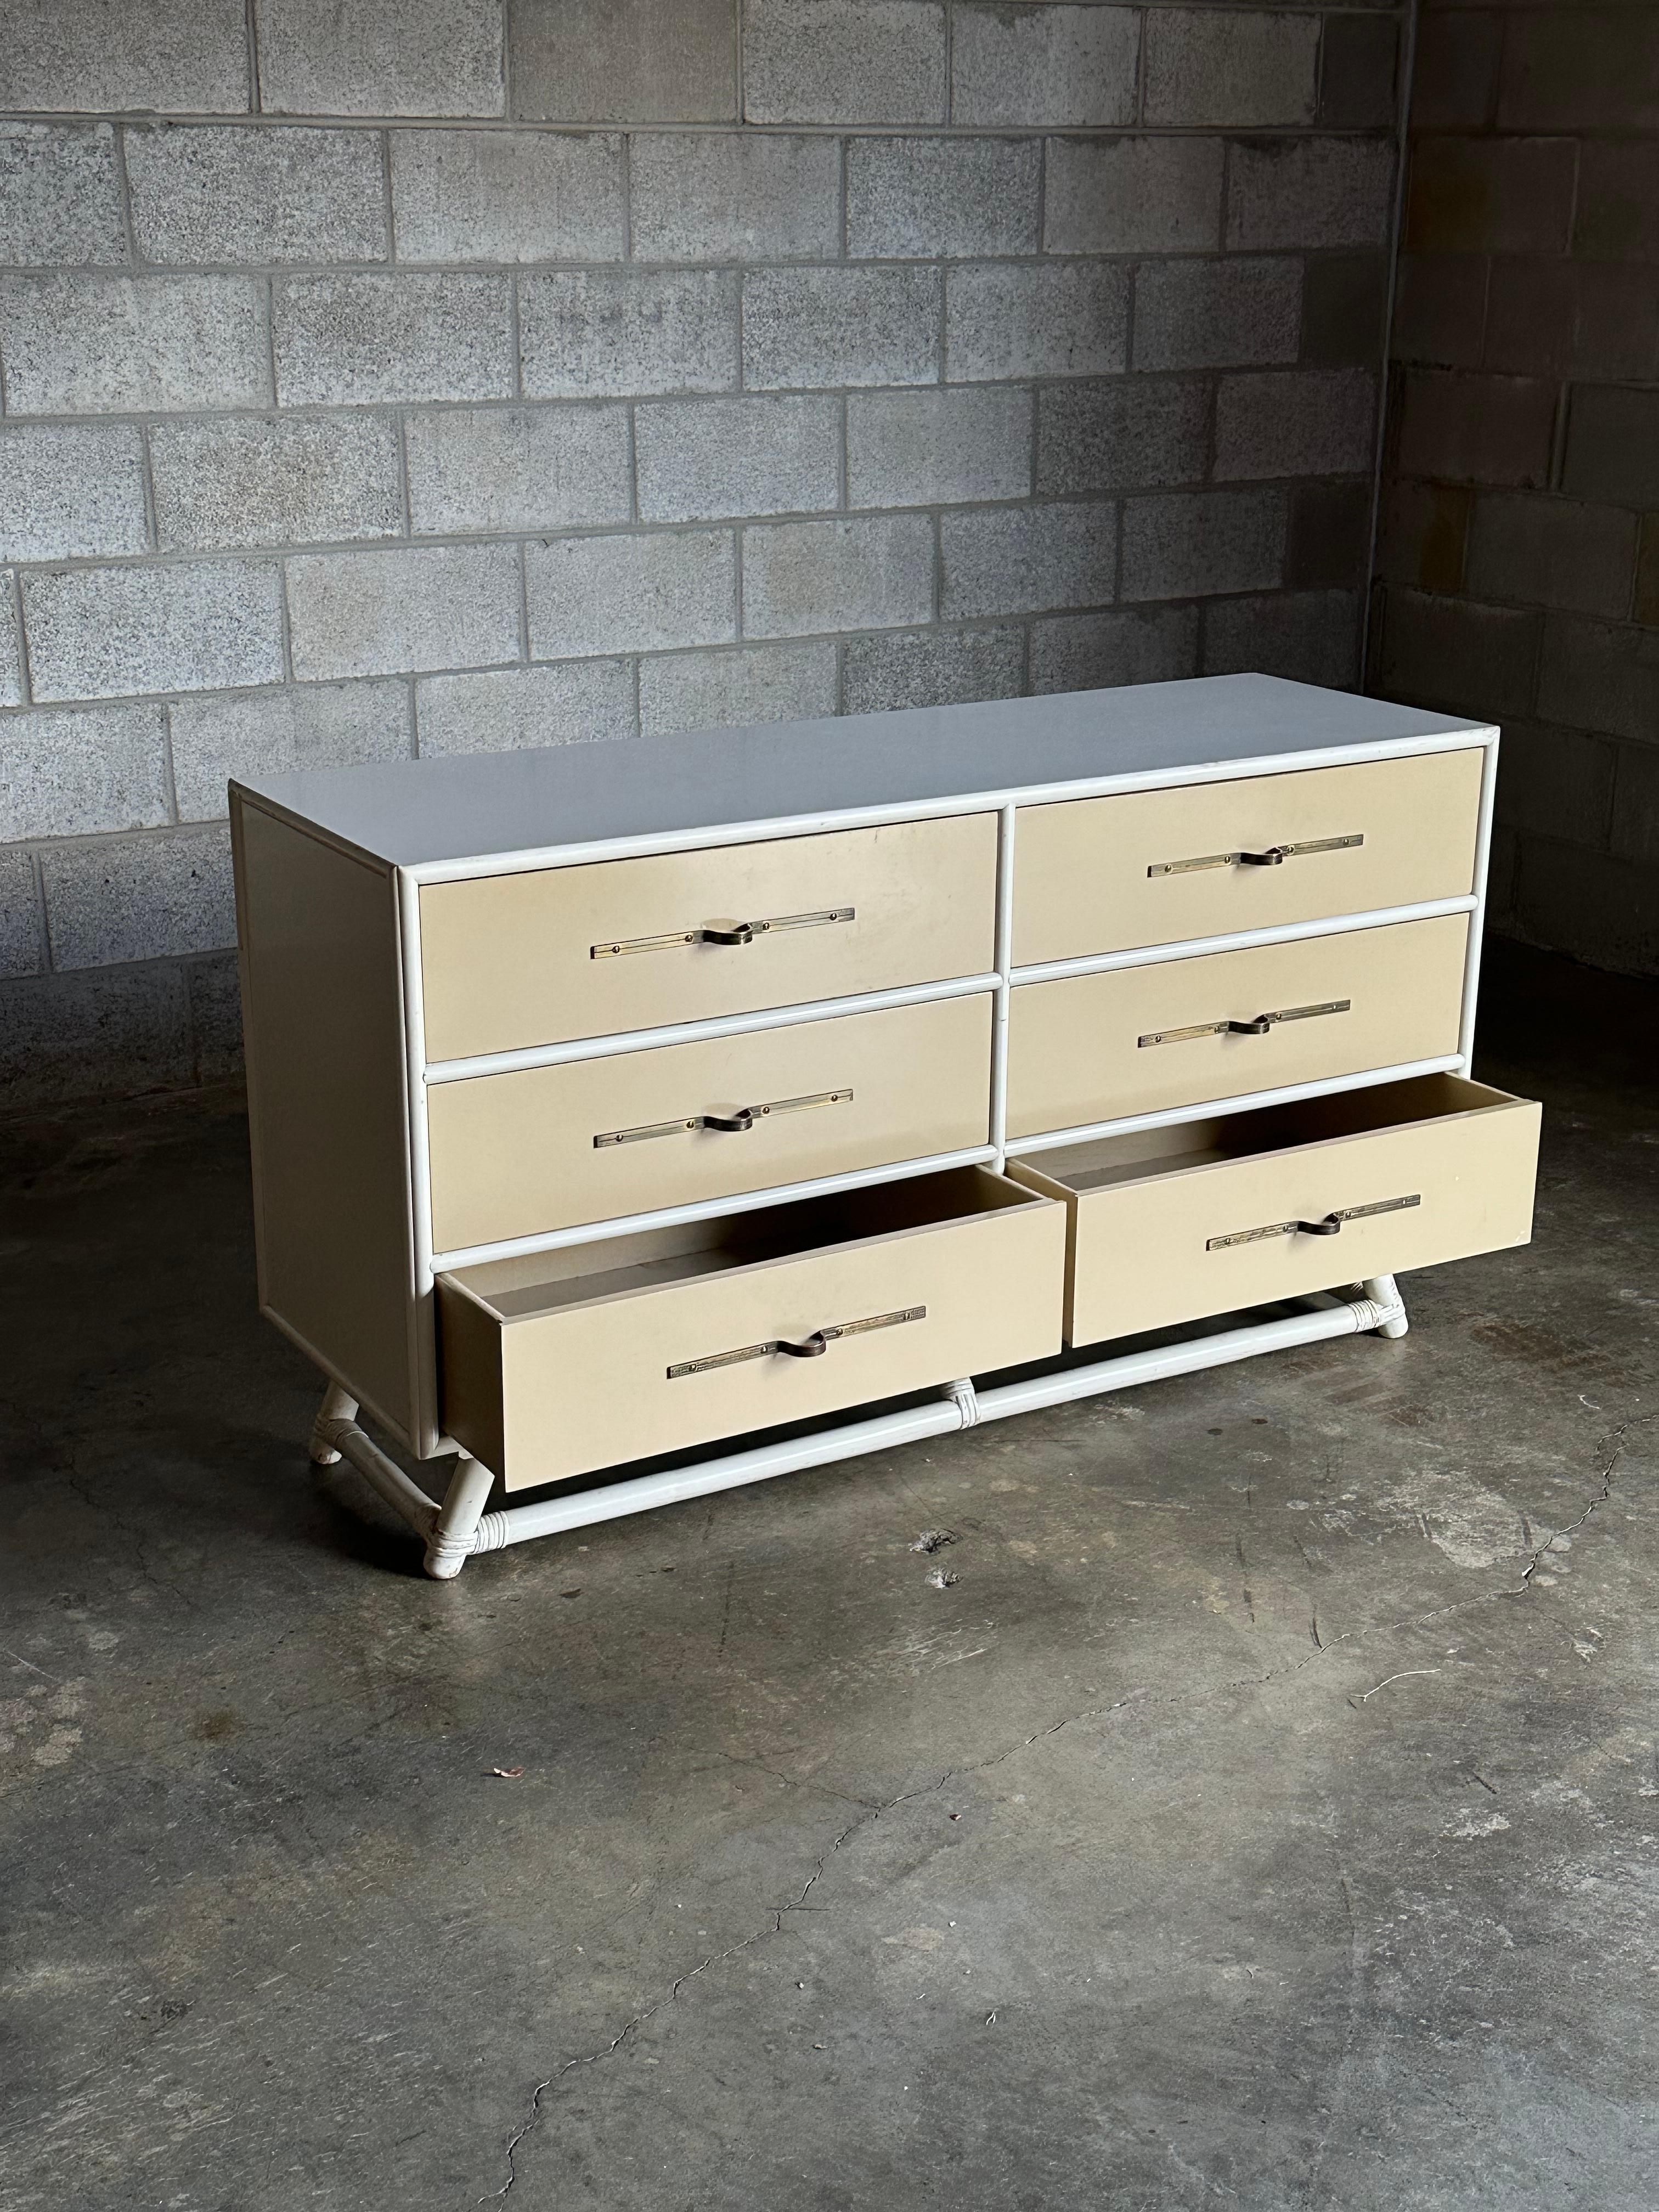 Mid-20th Century Tommi Parzinger Lacquered Dresser With Brass Hardware for Willow and Reed For Sale